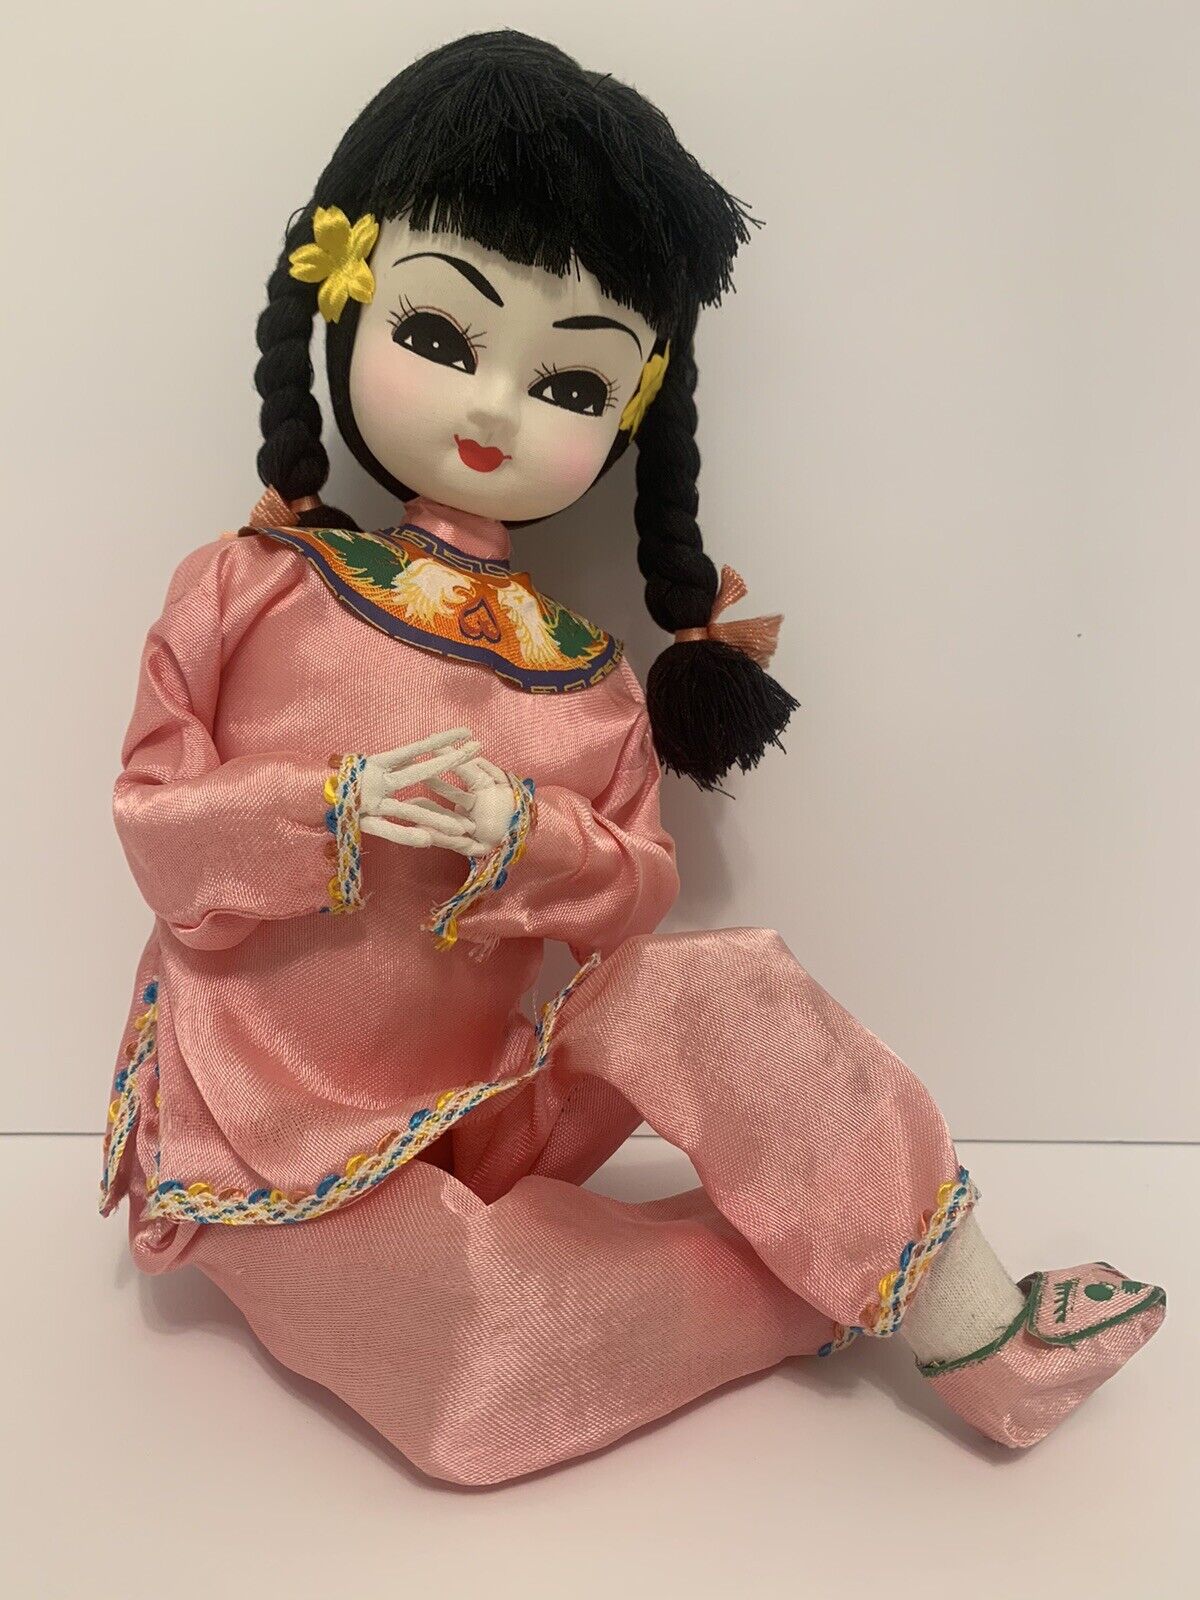 Vintage Stockinette Posed Asian Doll 1983 - Excellent Condition